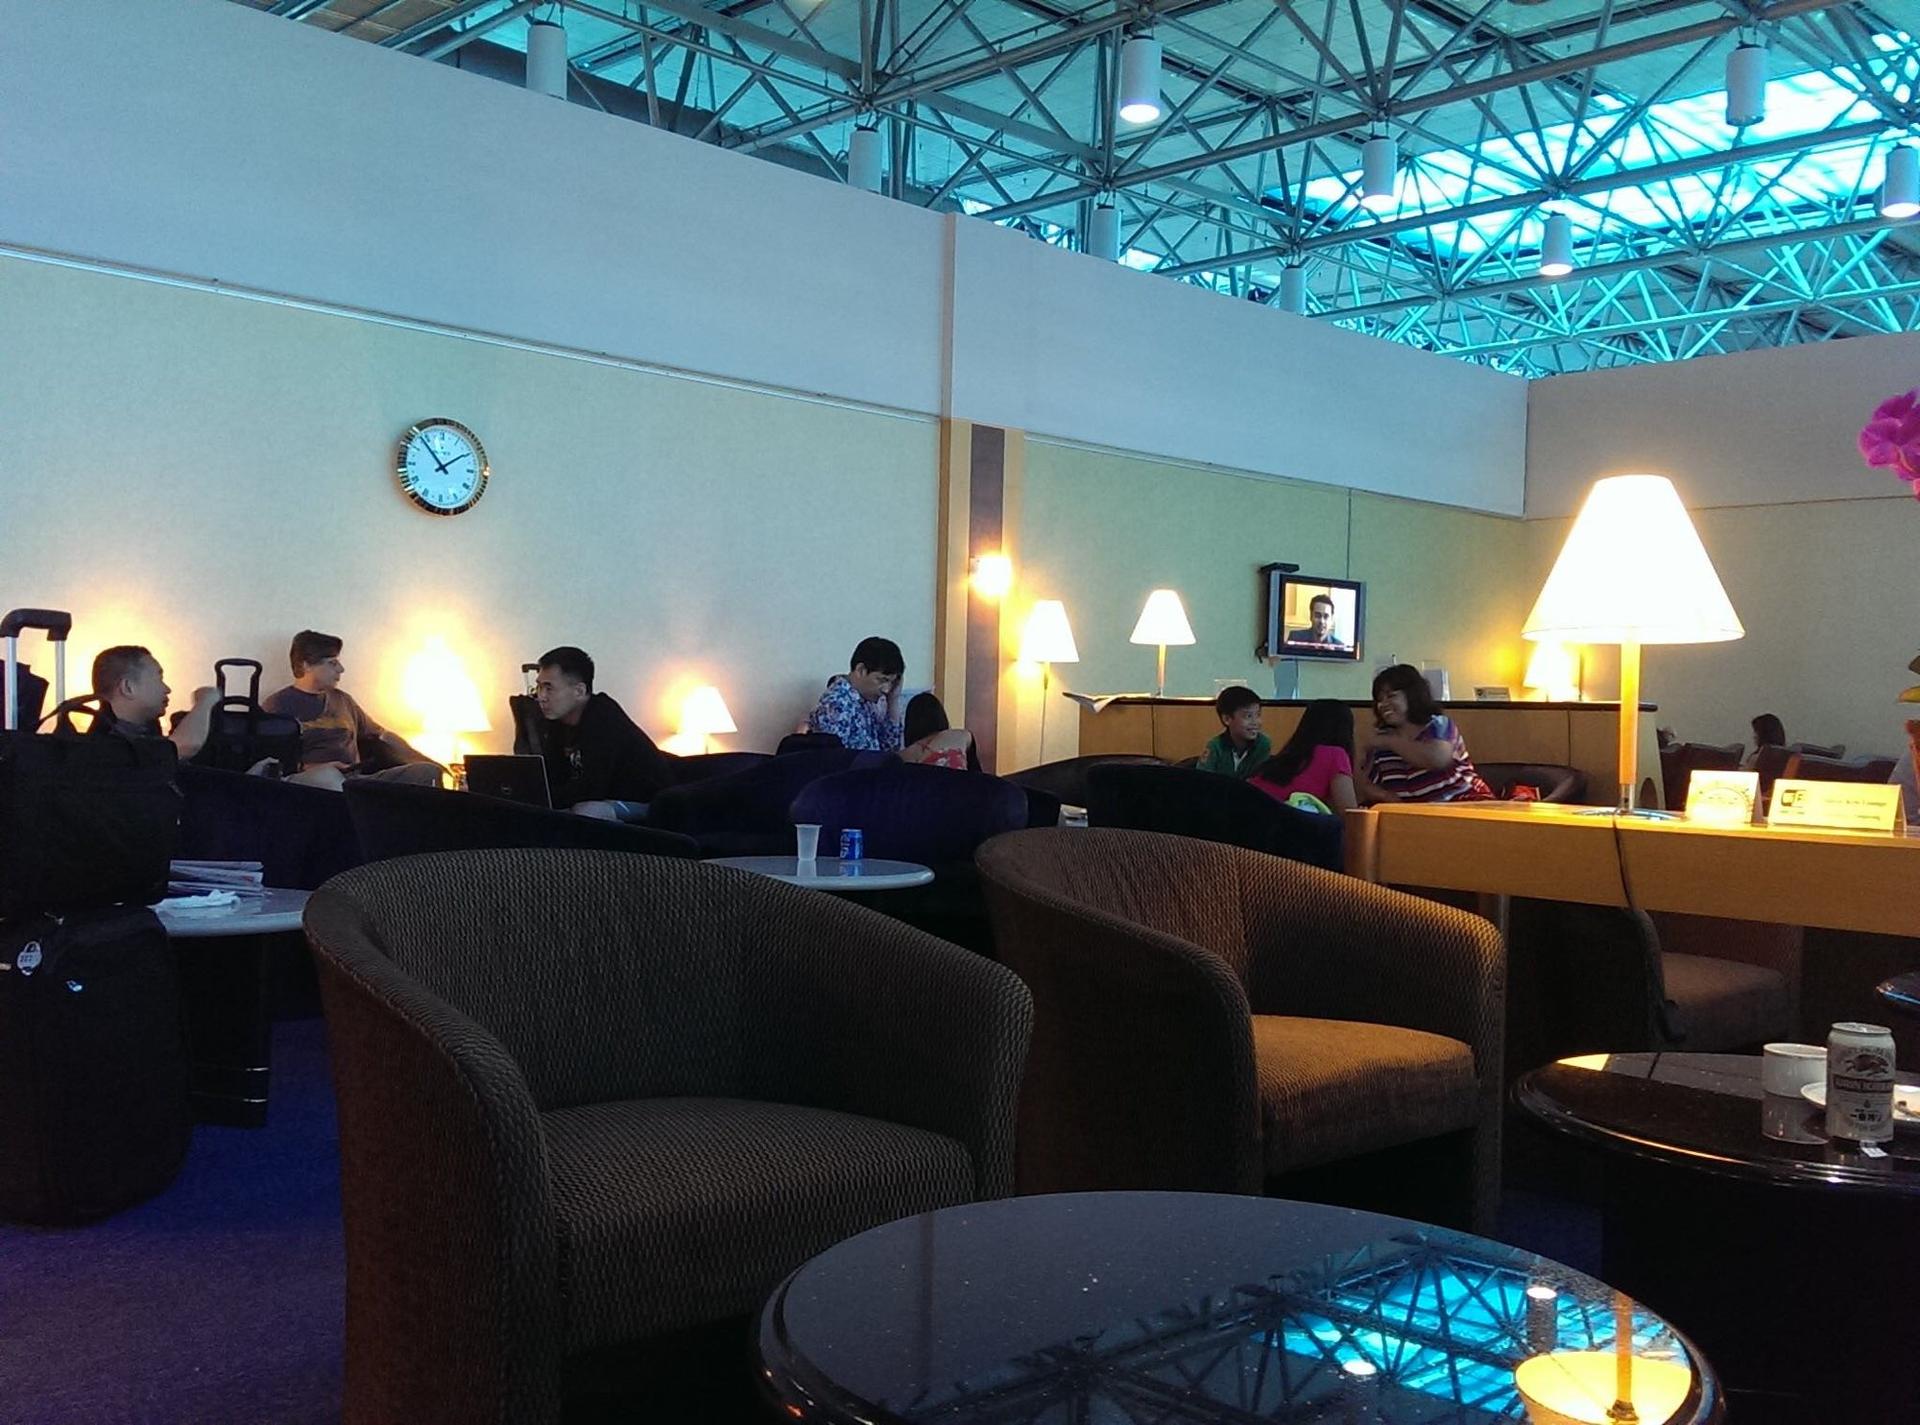 Singapore Airlines SilverKris Business Class Lounge image 6 of 14